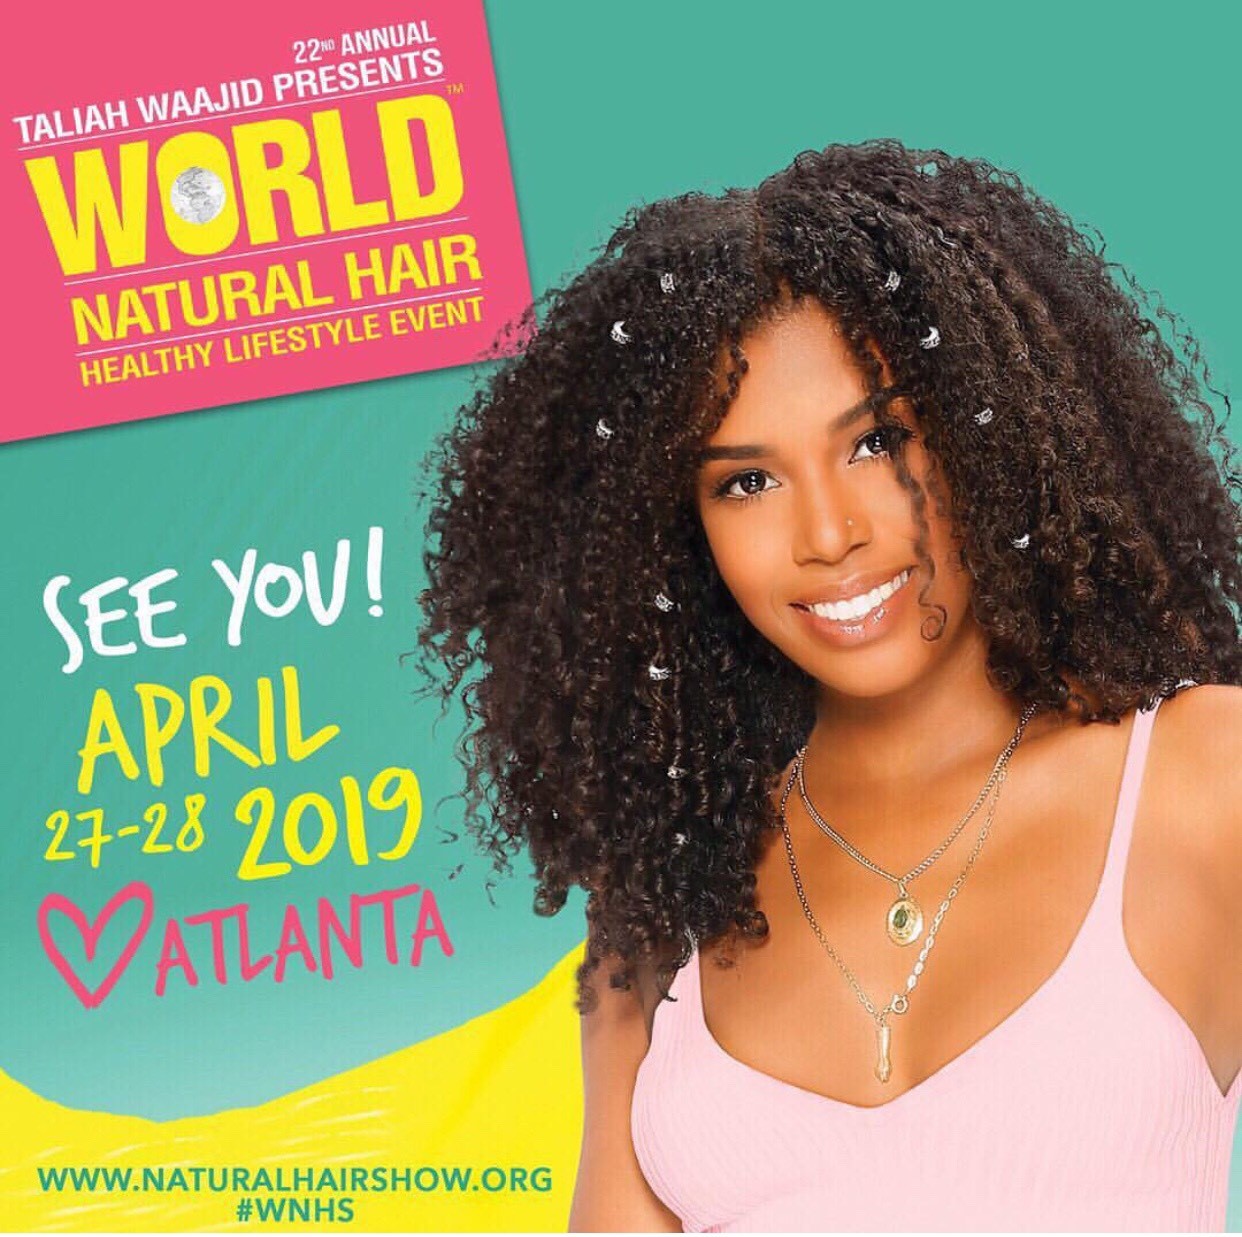 TICKETED: 22nd Annual Taliah Waajid presents World Natural Hair Healthy  Lifestyle Event- Atlanta, Ga- April 27th & 28th, 2019 – Jaded Tresses